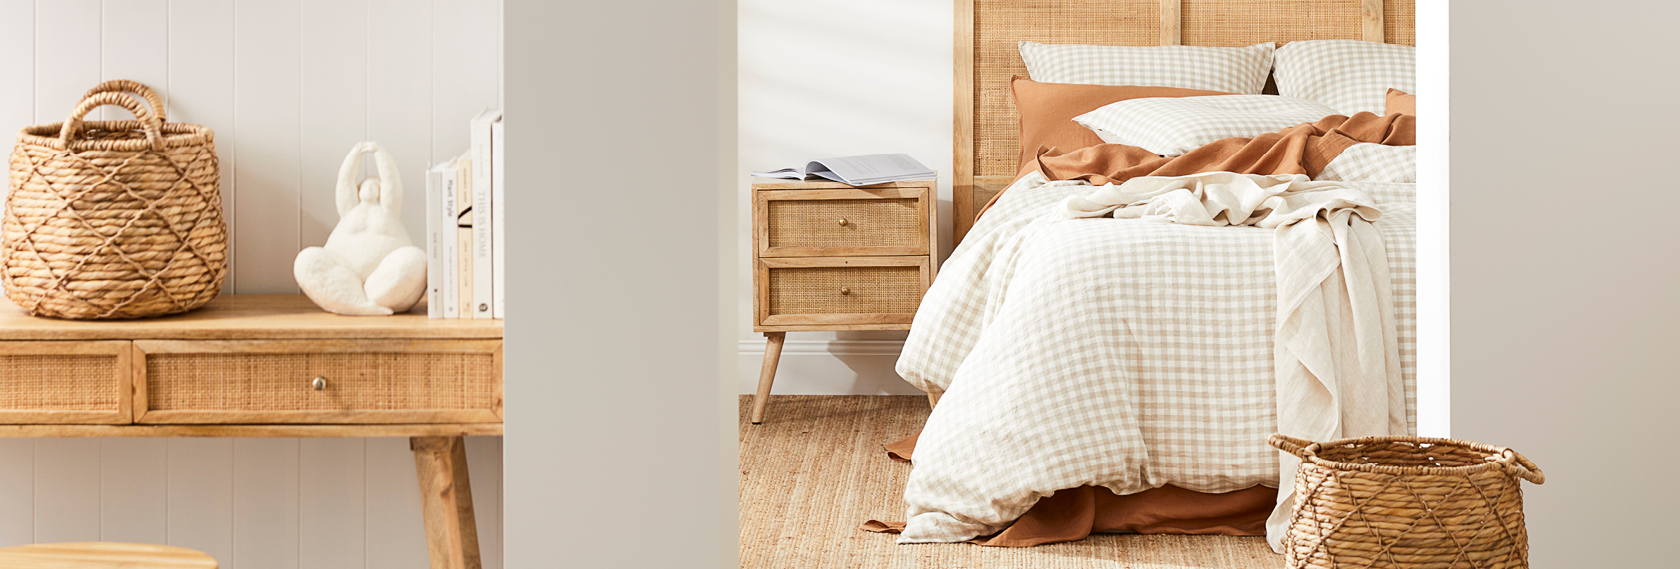 Home beautifully decorated with Adairs products, focus on bedlinen and bedroom furniture.